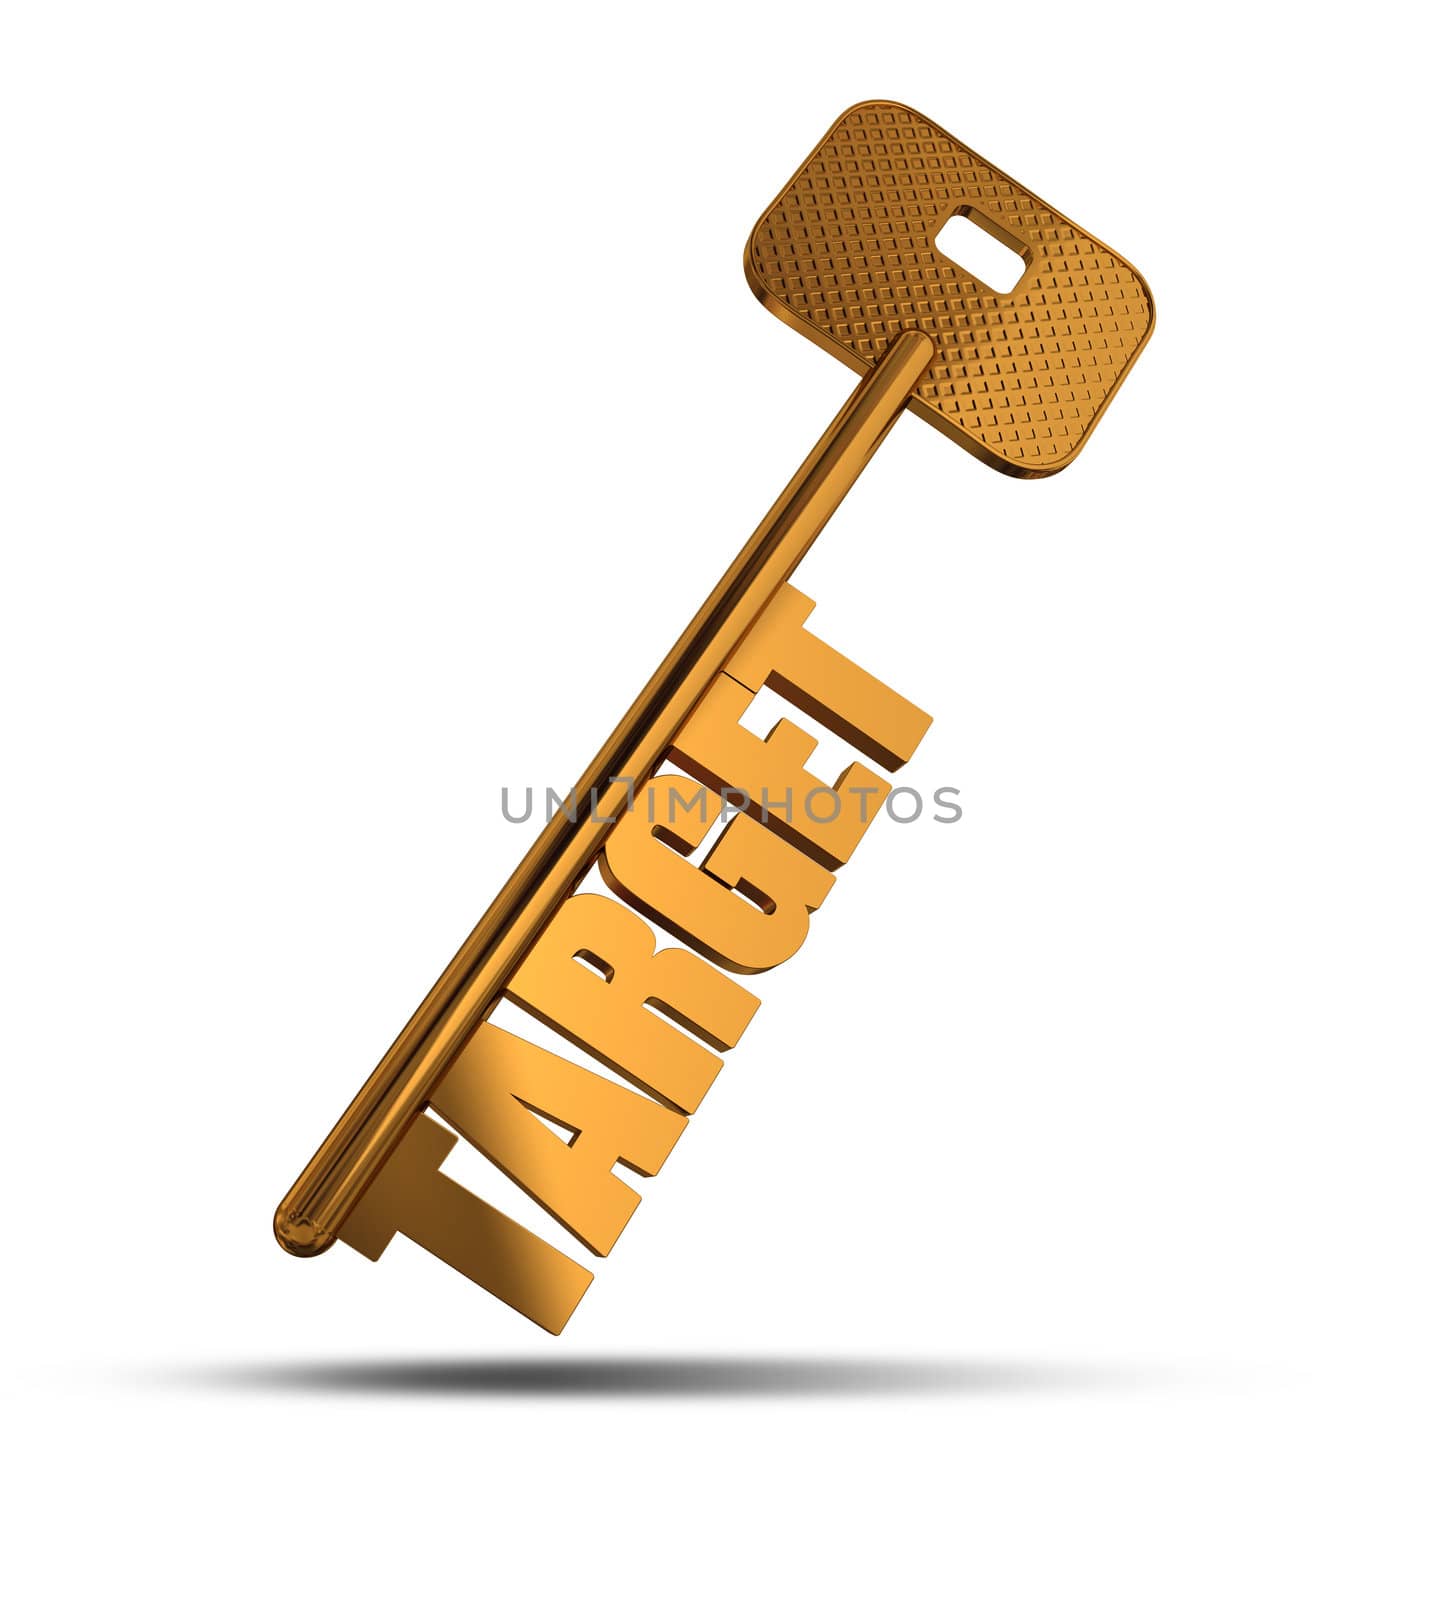 Target gold key isolated on white  background - Gold key with Target text as symbol for success in marketing - Conceptual image